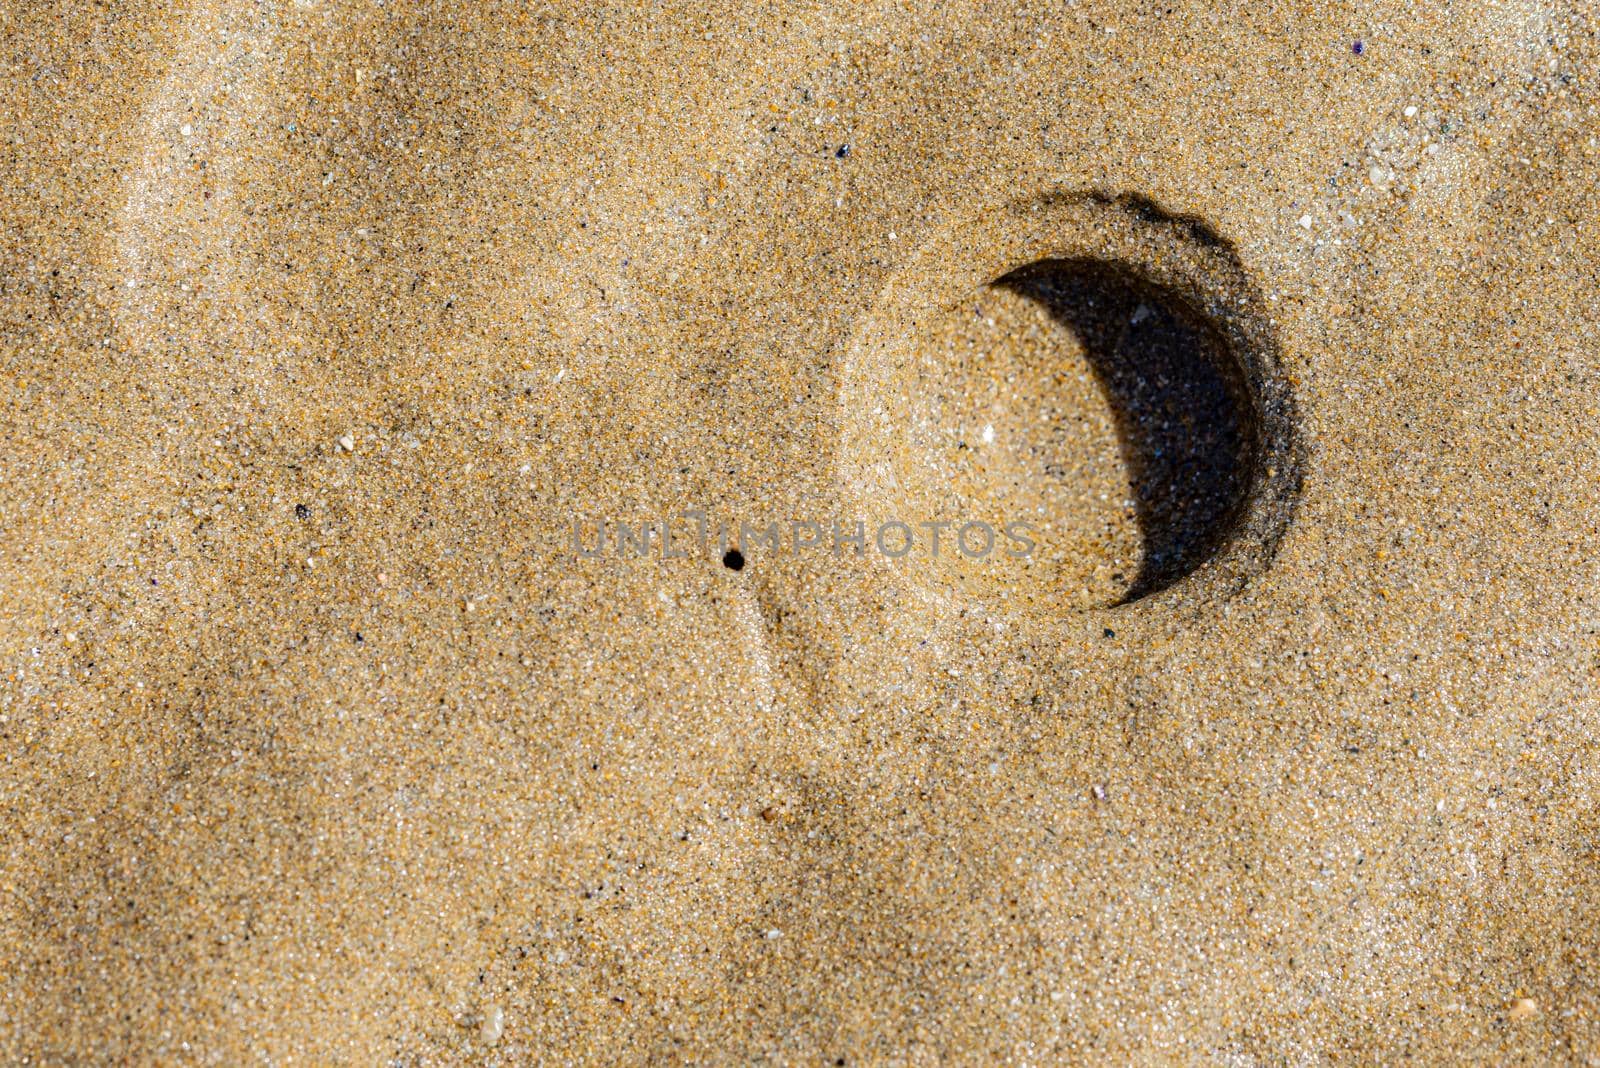 Holes of Solen Marginatus in the sand of the beach by MaxalTamor